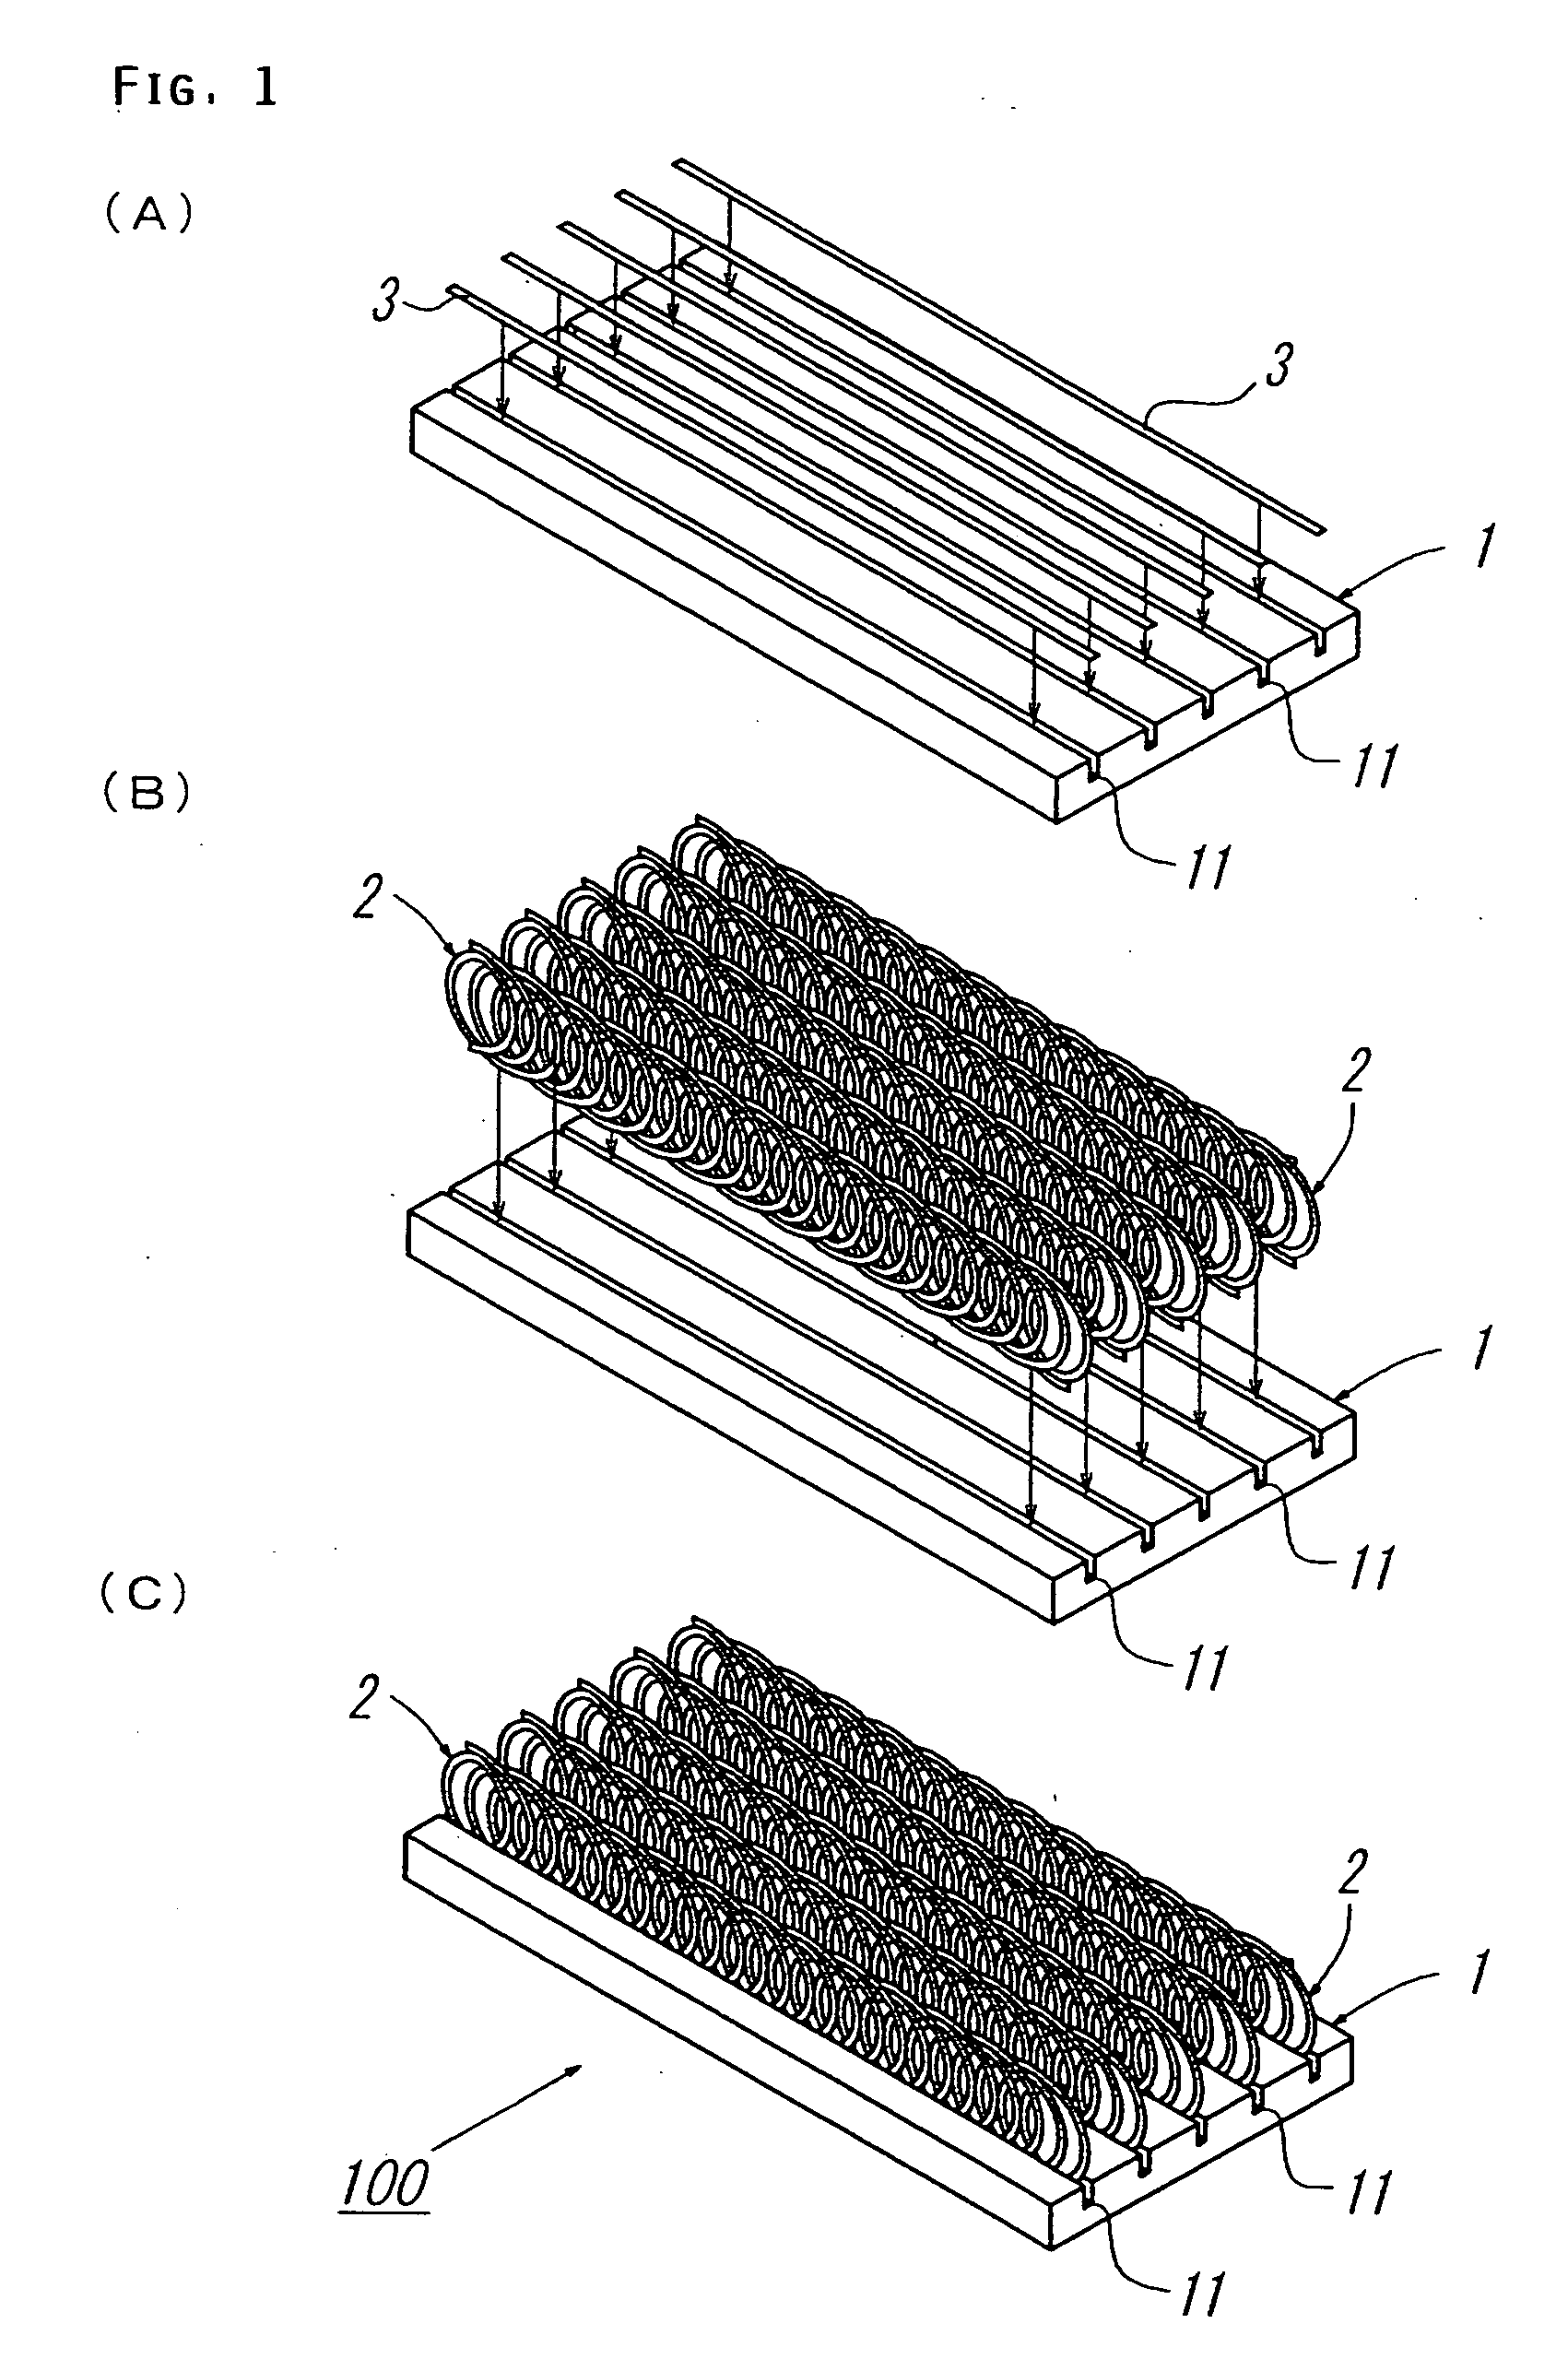 Method for Manufacturing a Heat Sink